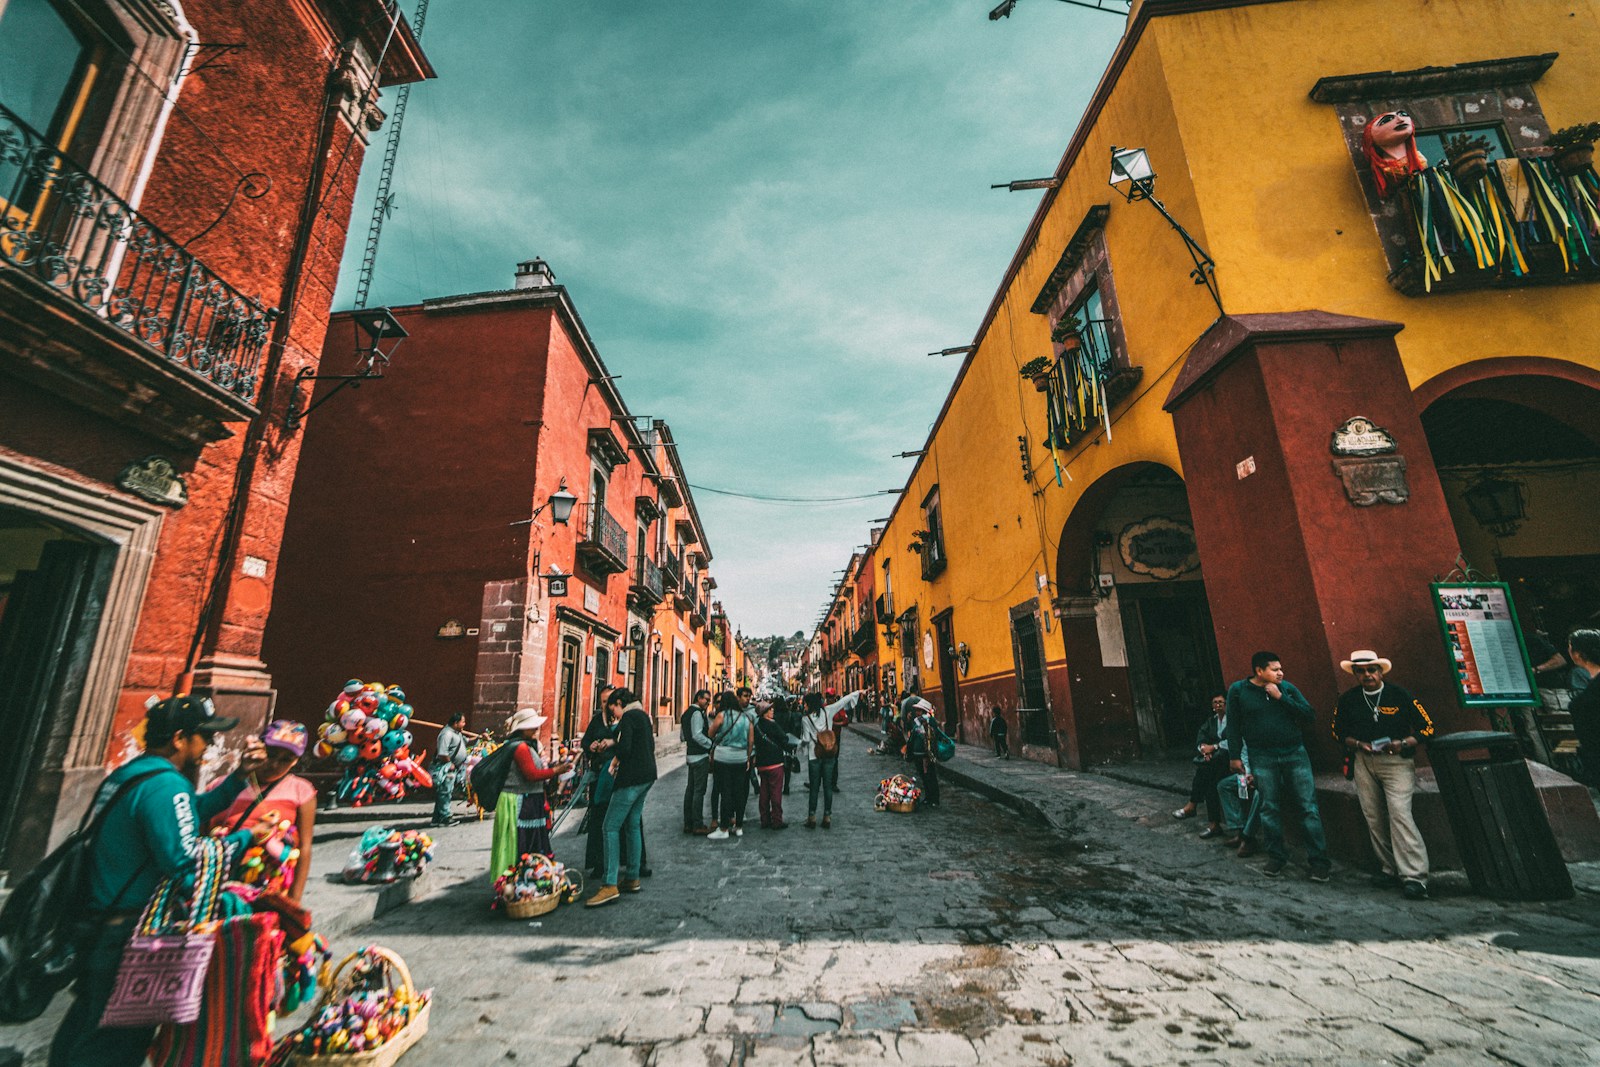 Mexico Travel Insurance: Tips and Safety Information